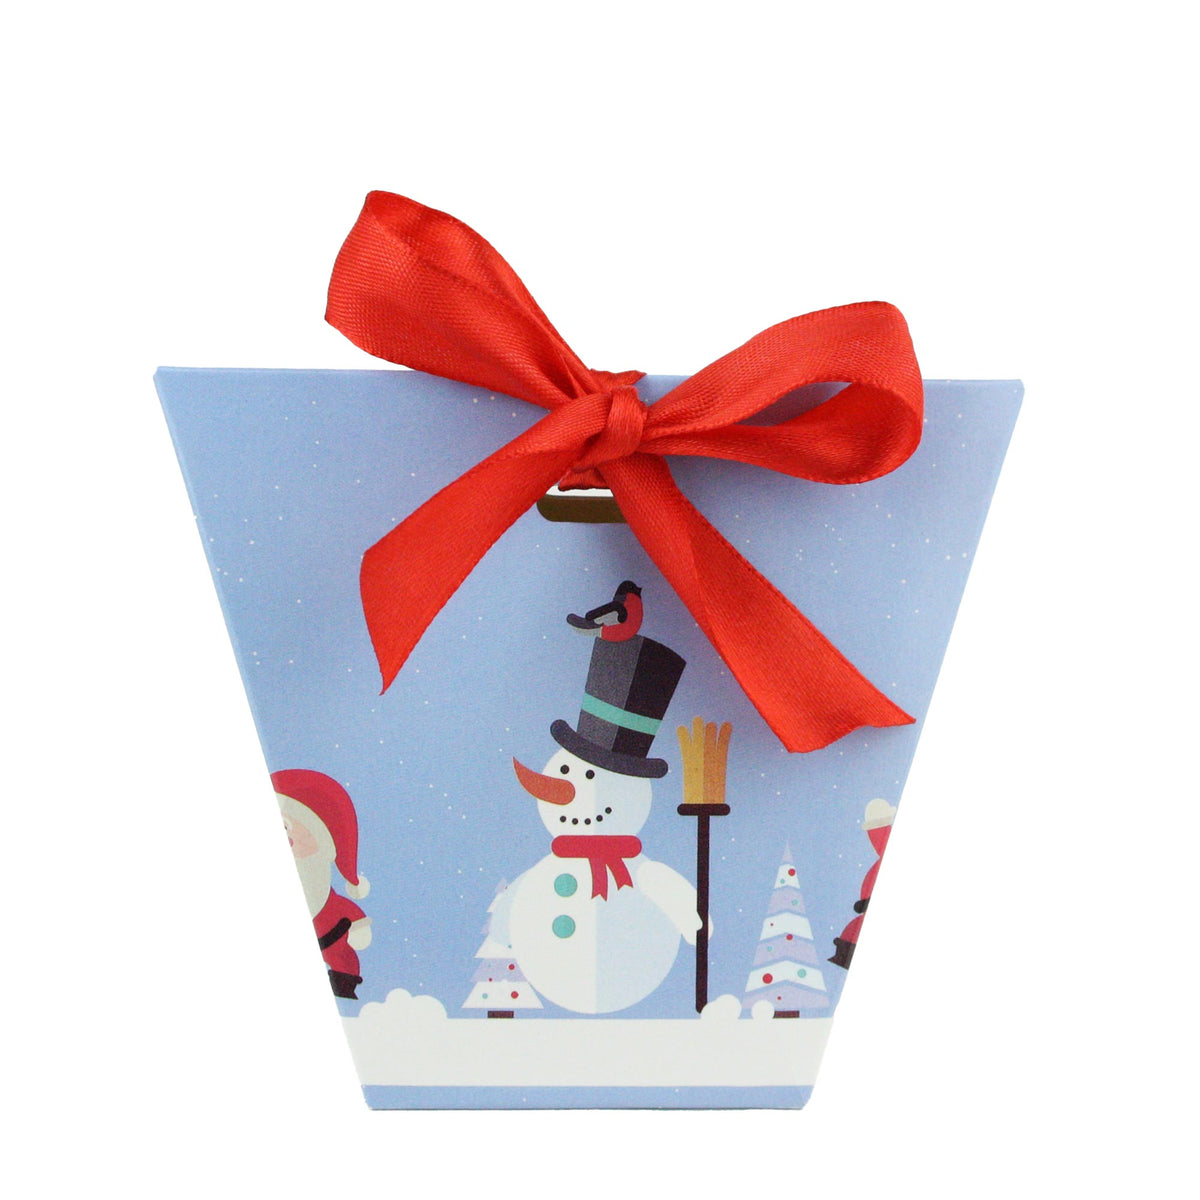 Emartbuy Gifting: Cone Candy Gift Boxes